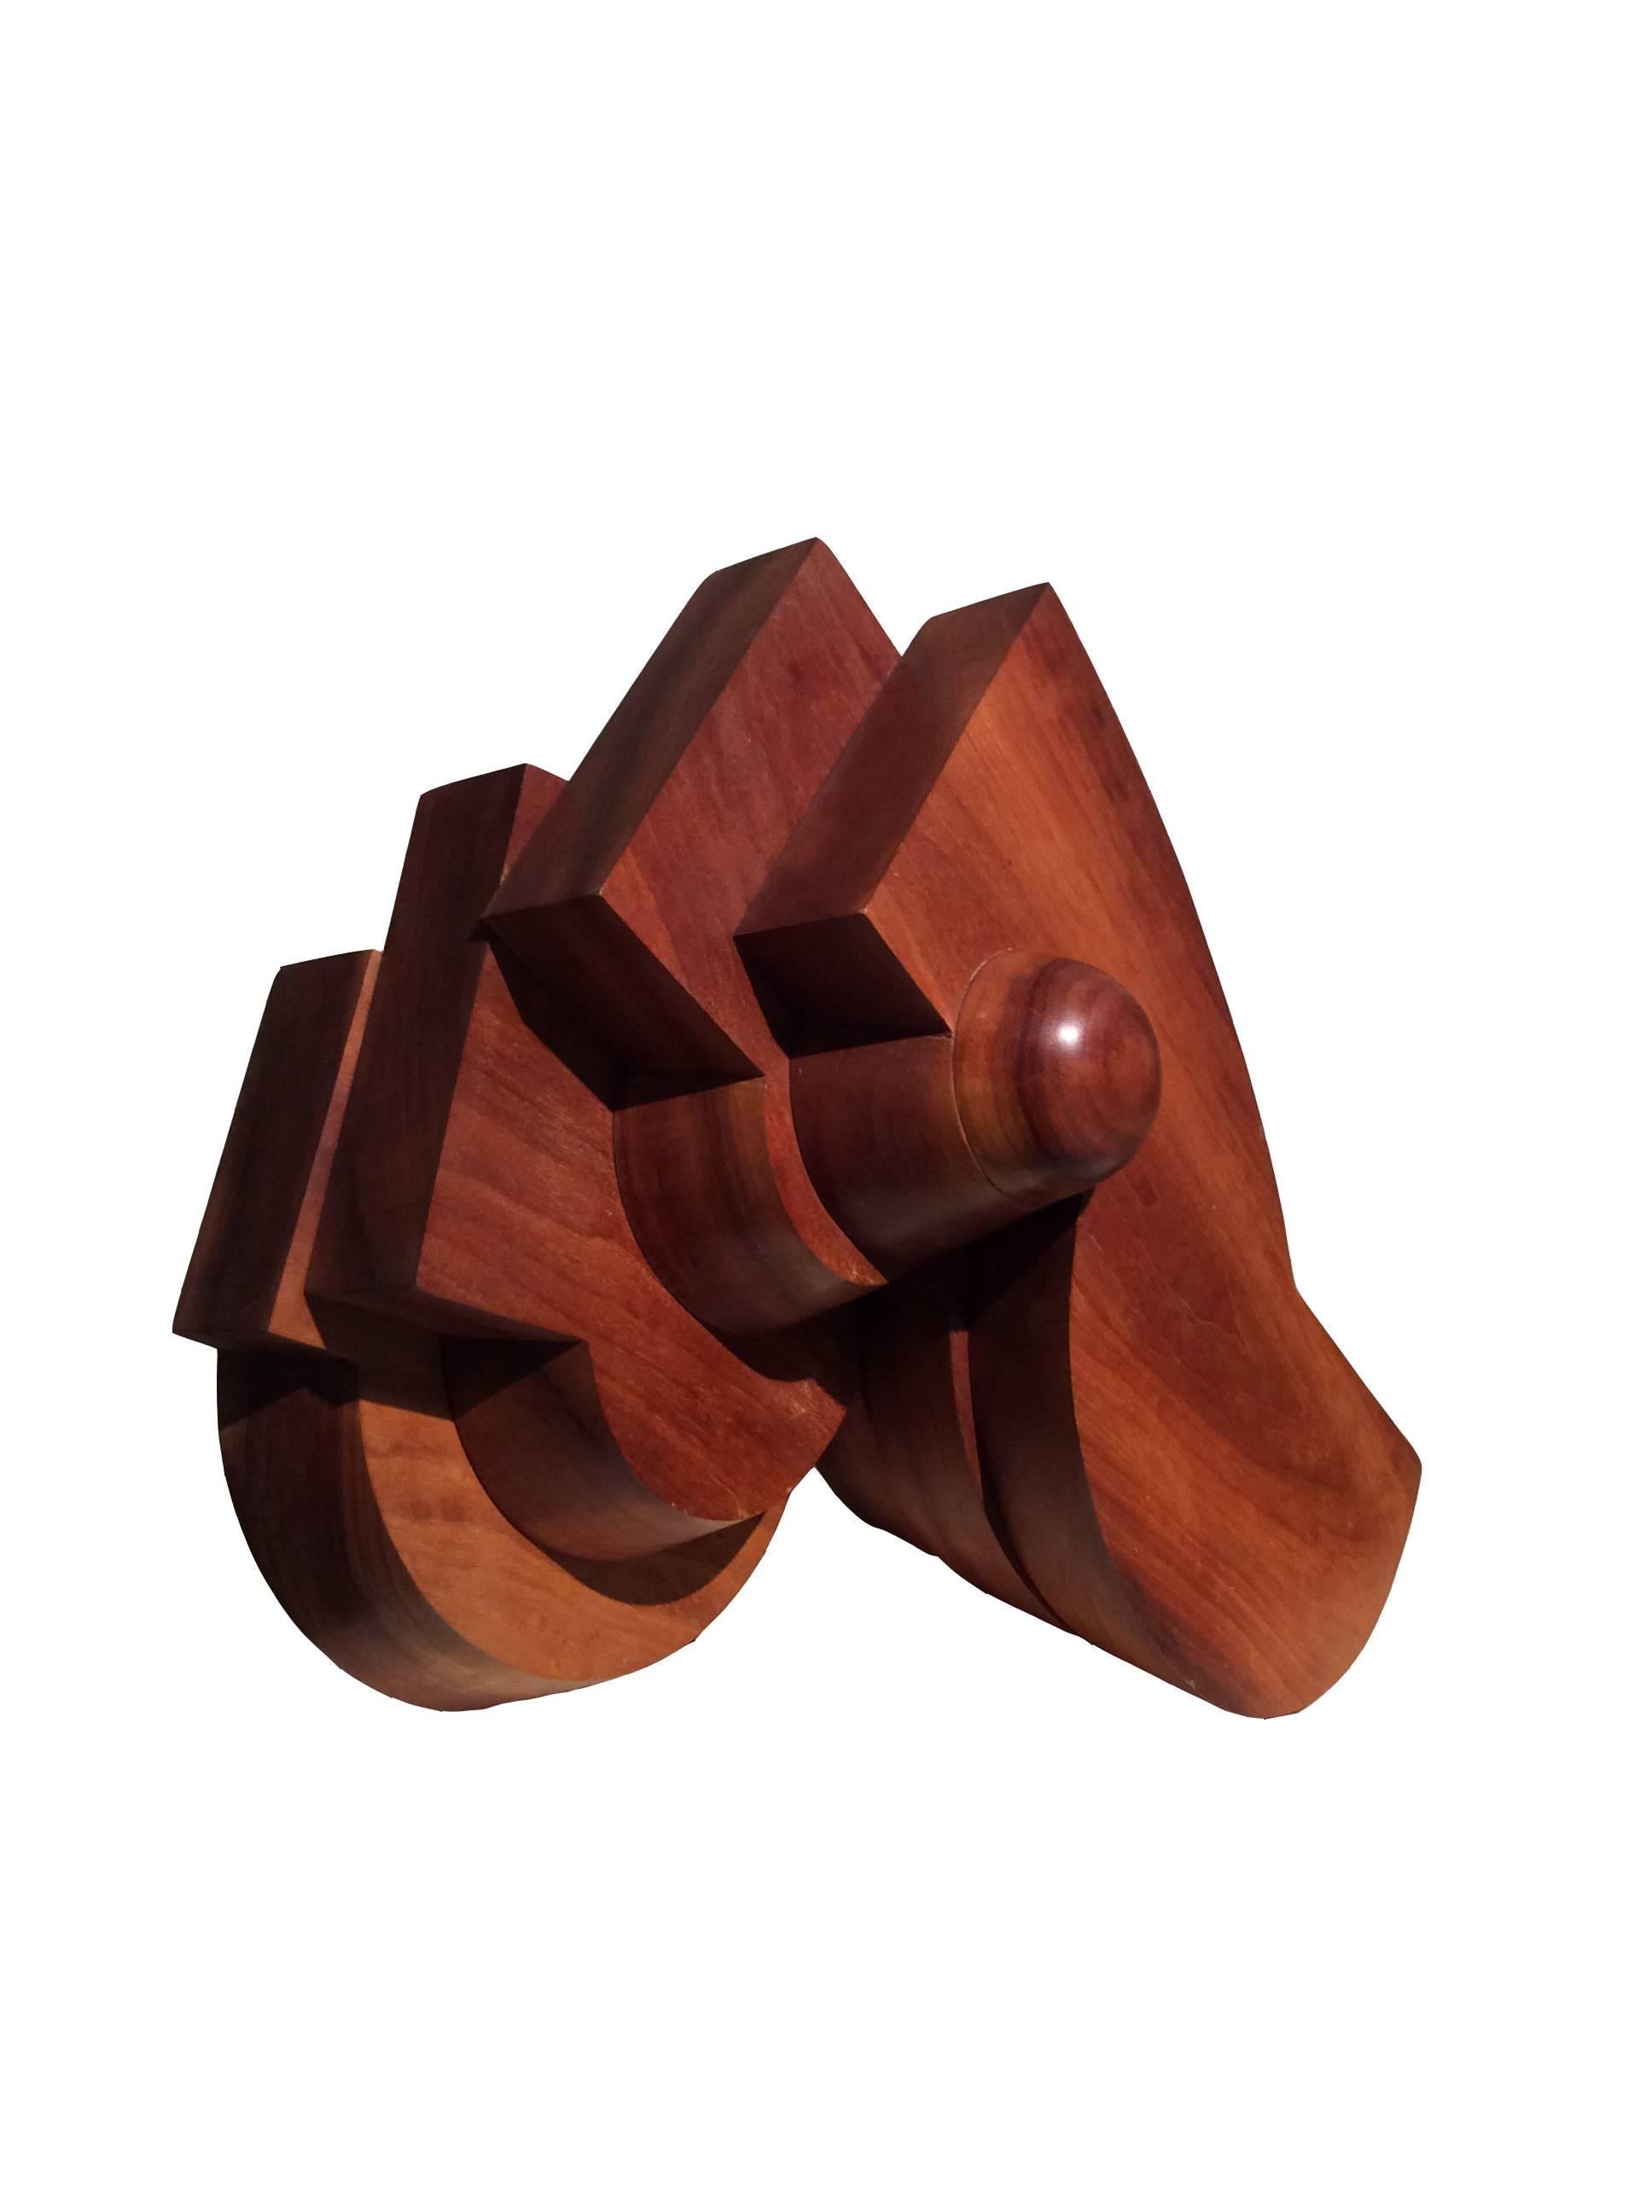 small wood sculpture